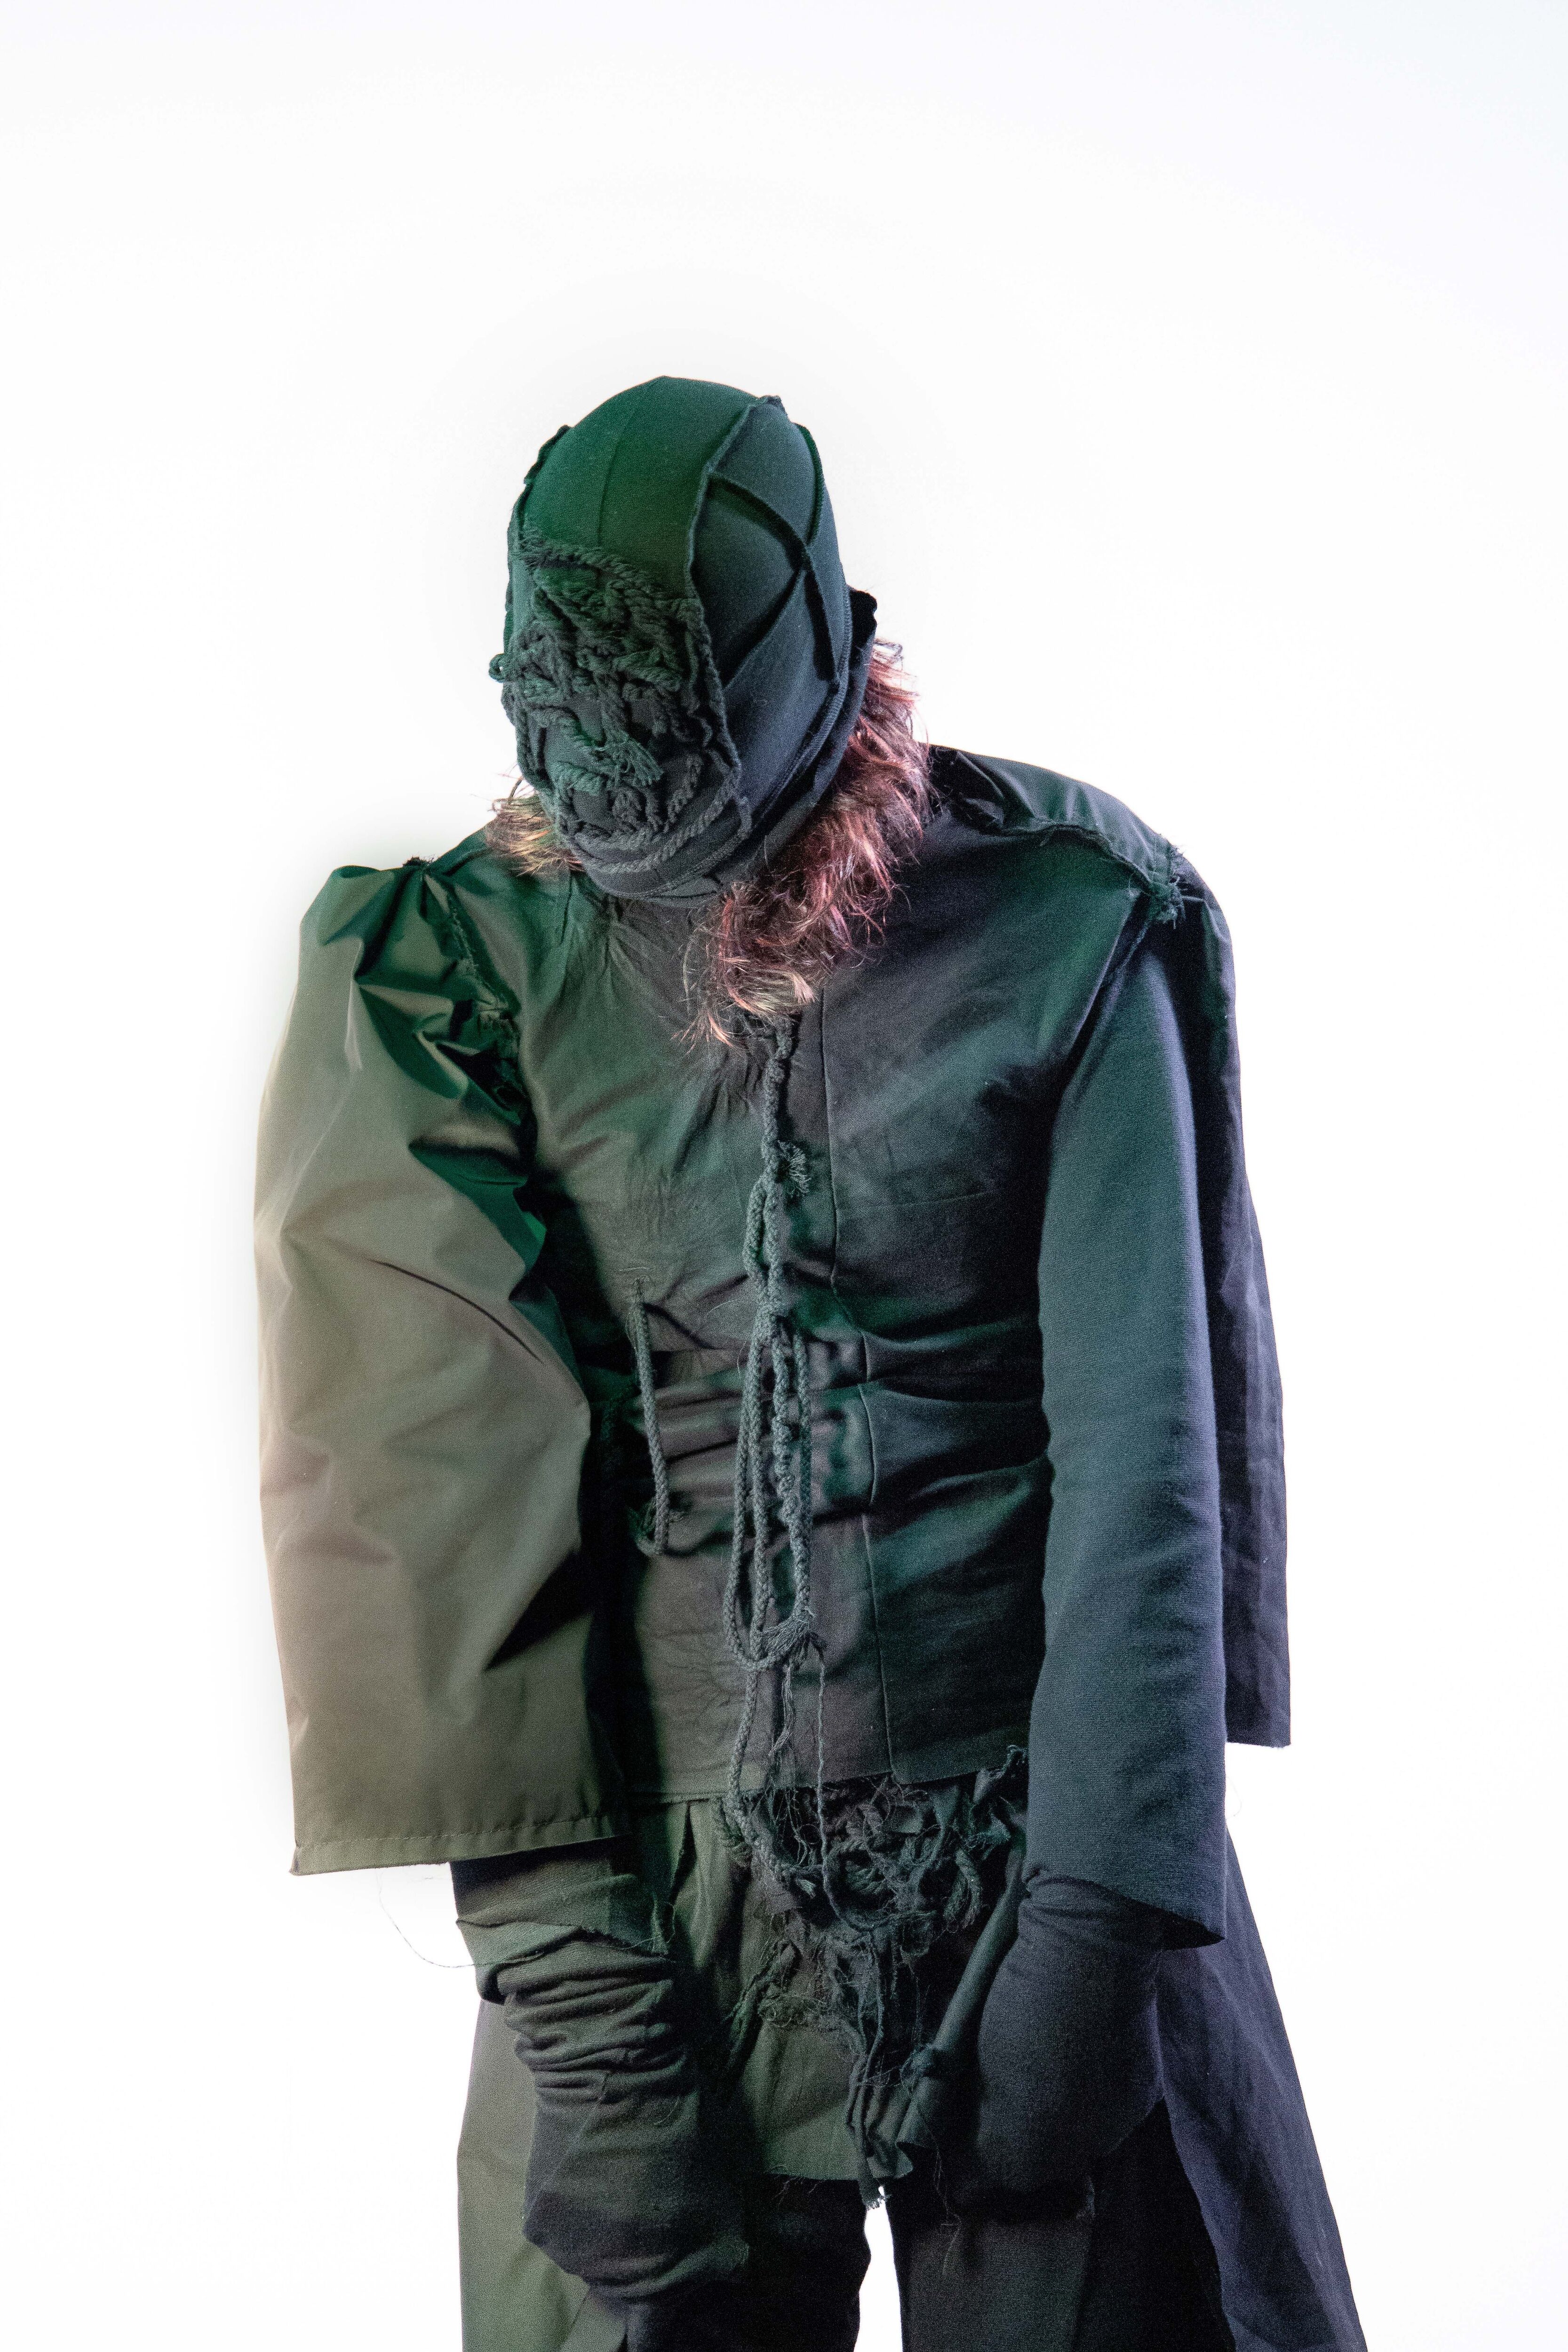 A person shrouded in dark green, textured clothing, with a hood covering their face, stands against a white background, exuding an aura of mystery.